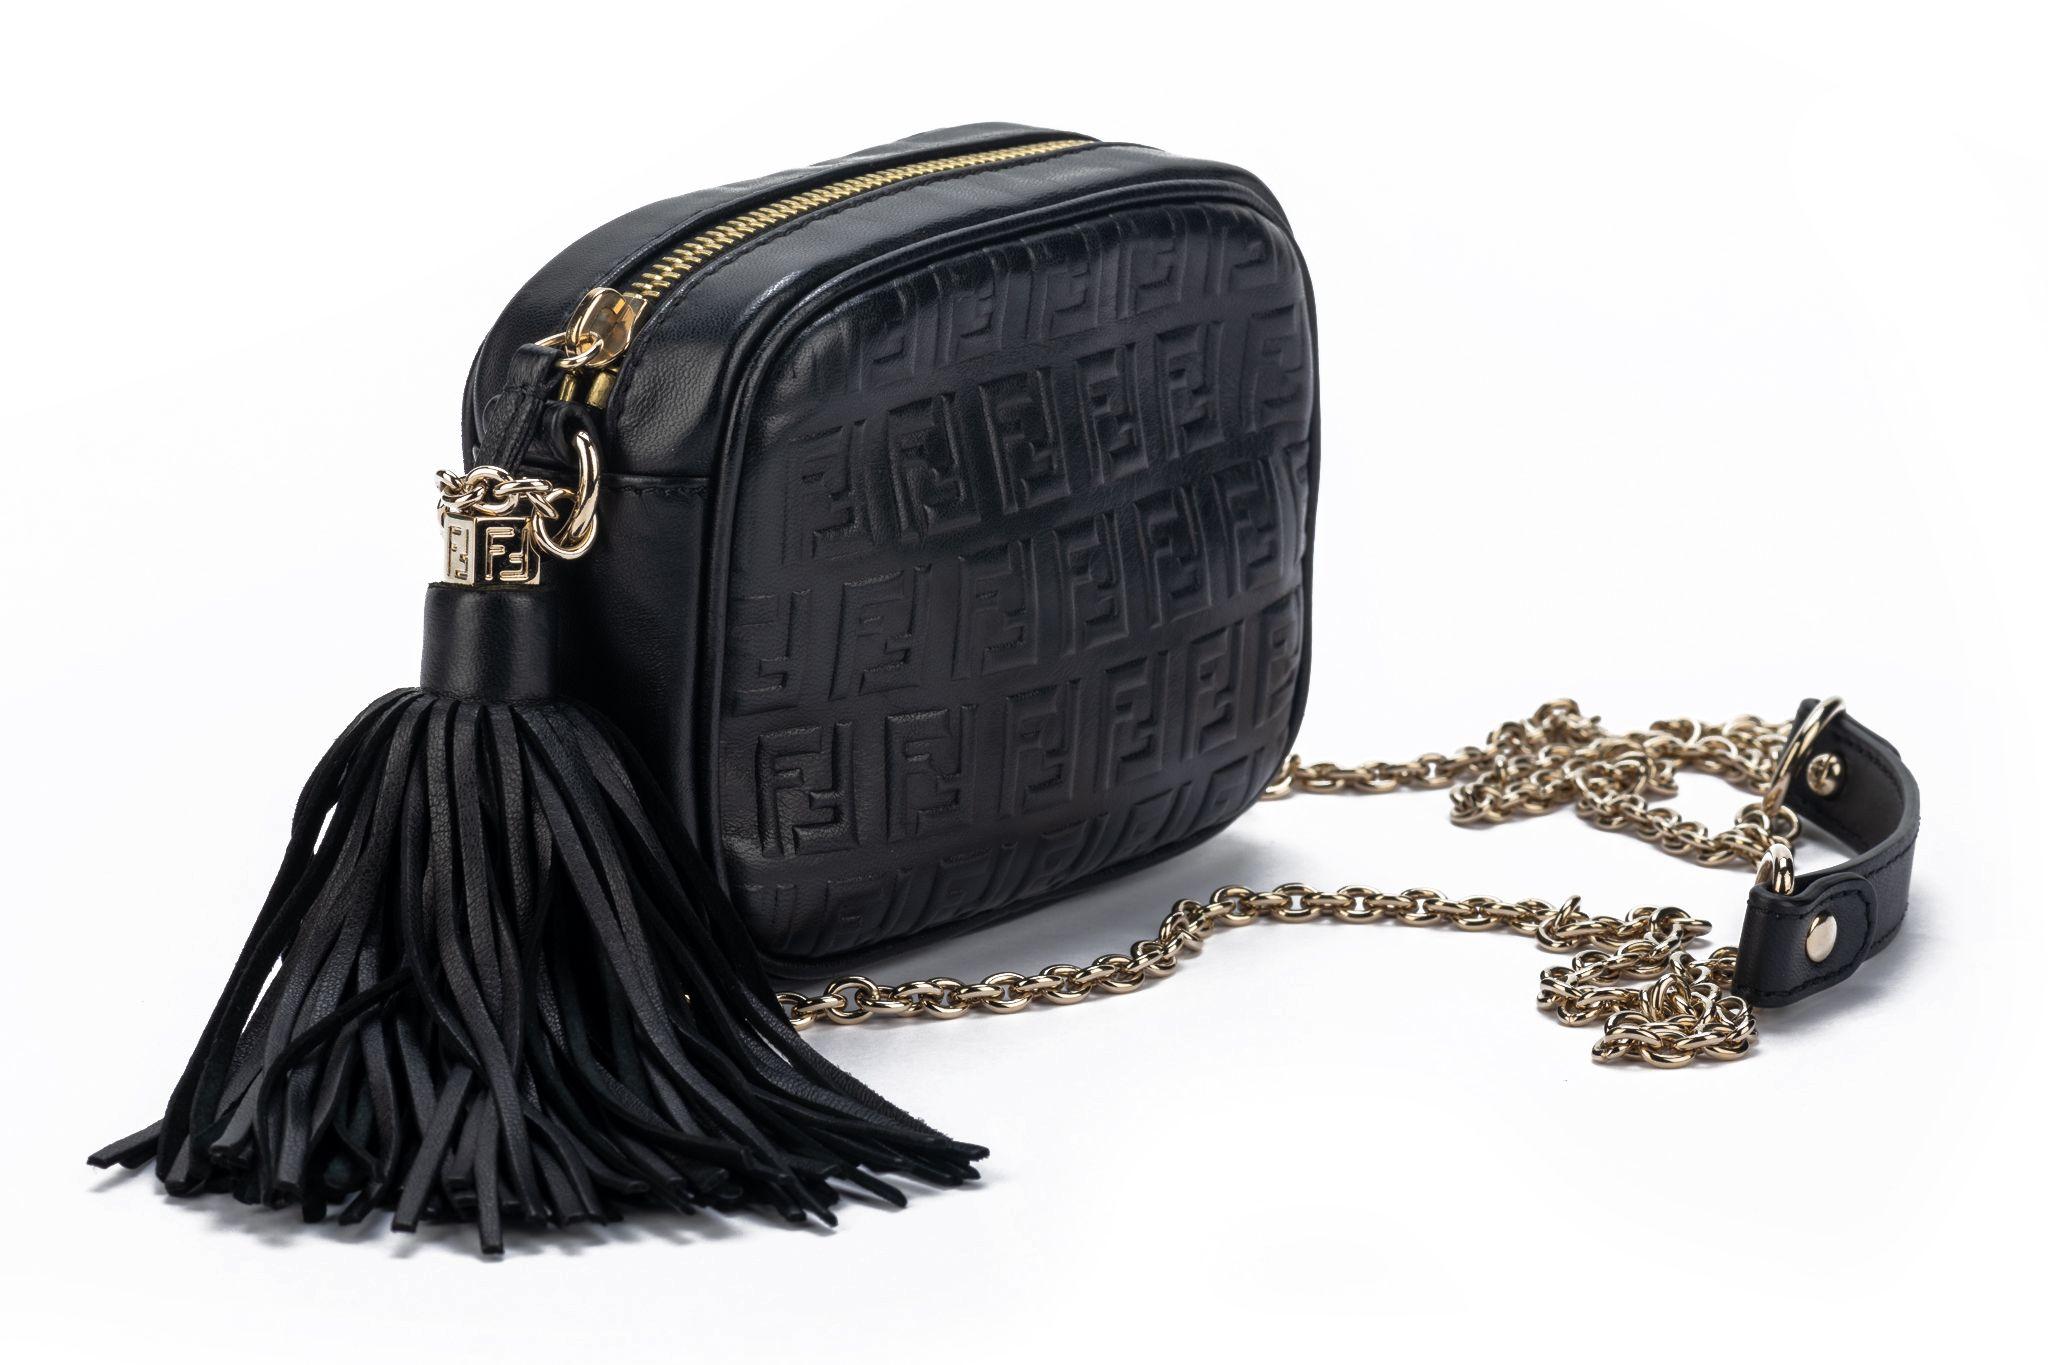 Fendi new condition black leather embossed camera bag with tassel. Shoulder cross body drop 22”. Inside fuchsia silk lining. Comes with box, booklet and dustcover